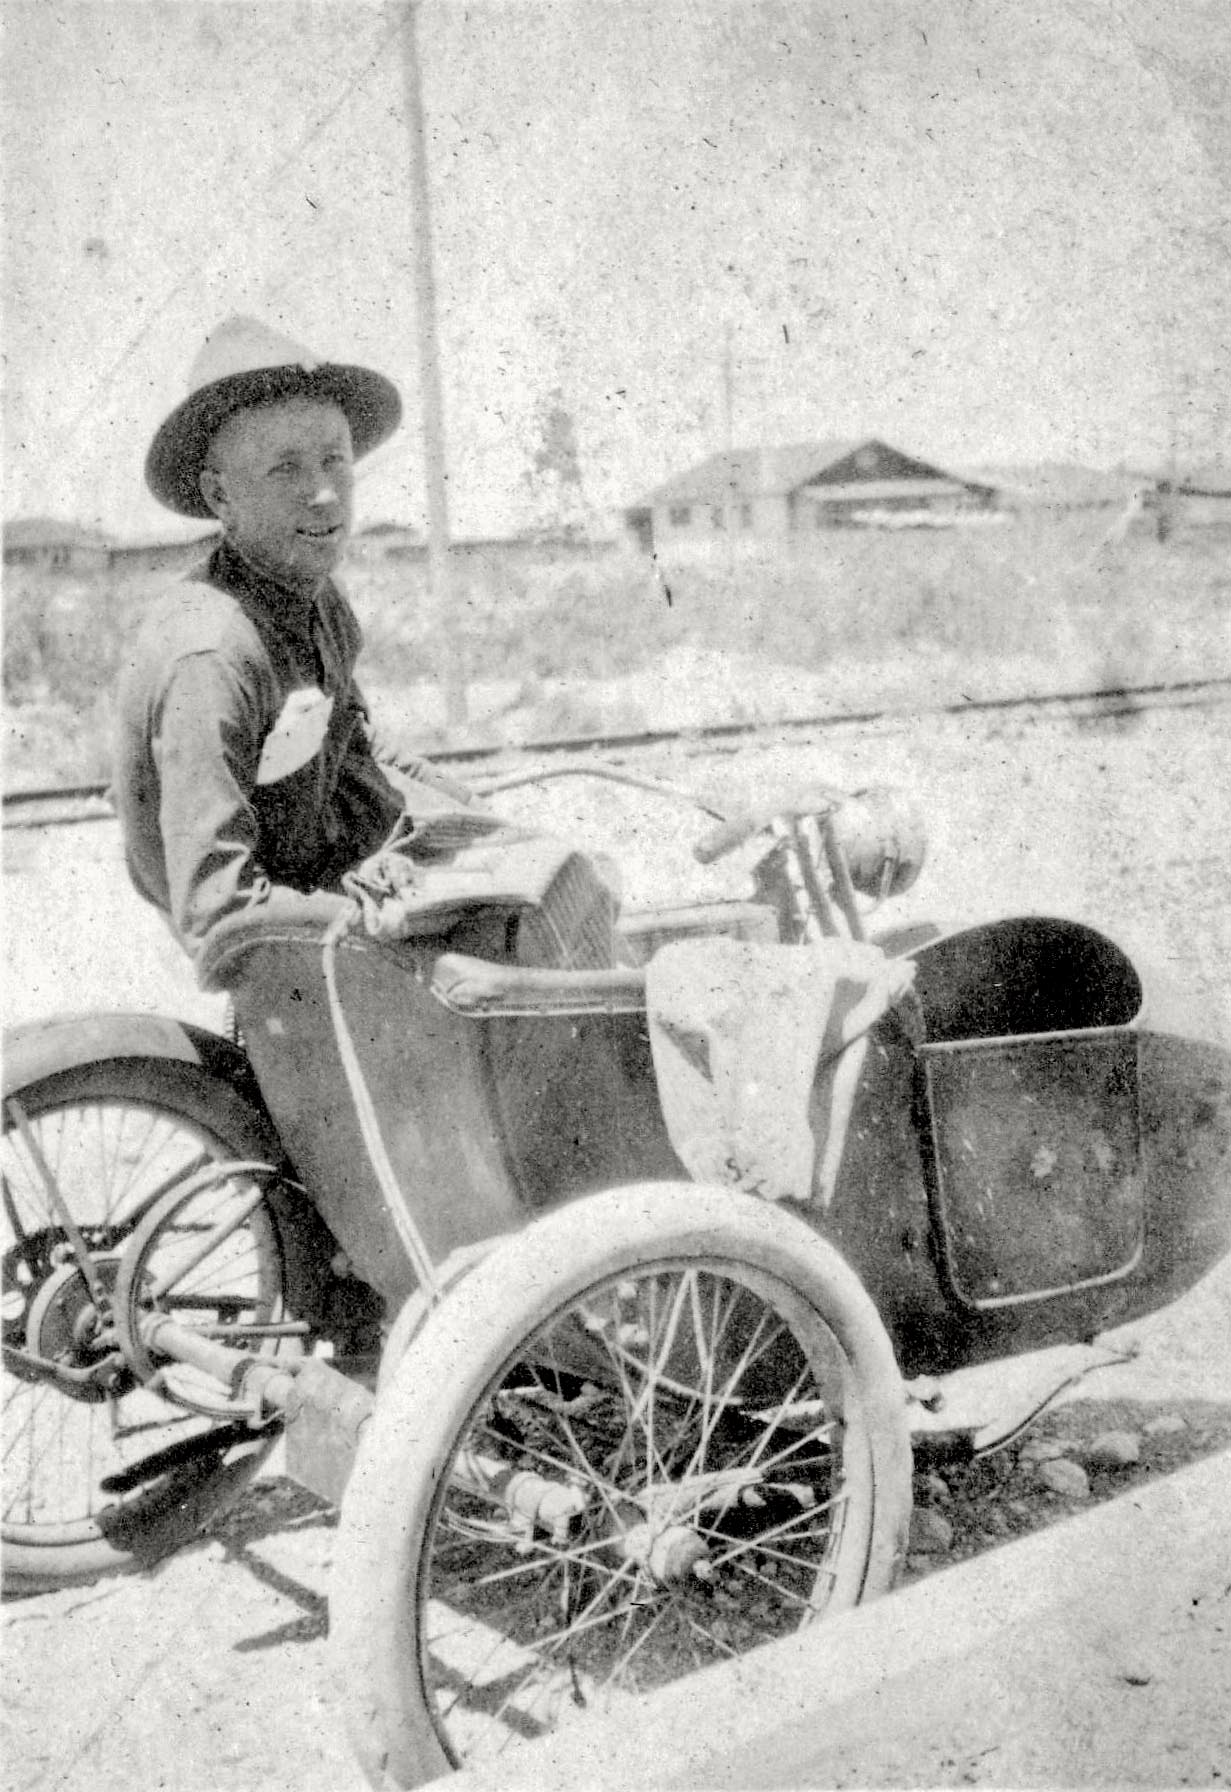 My Grandfather, Cpl William Henry Verhoeks at Ft. Bliss, Texas, in 1918. He was a courier for the post veterinarian. I copied this from a 3x3 image in my Grandmother's photo album. View full size.
